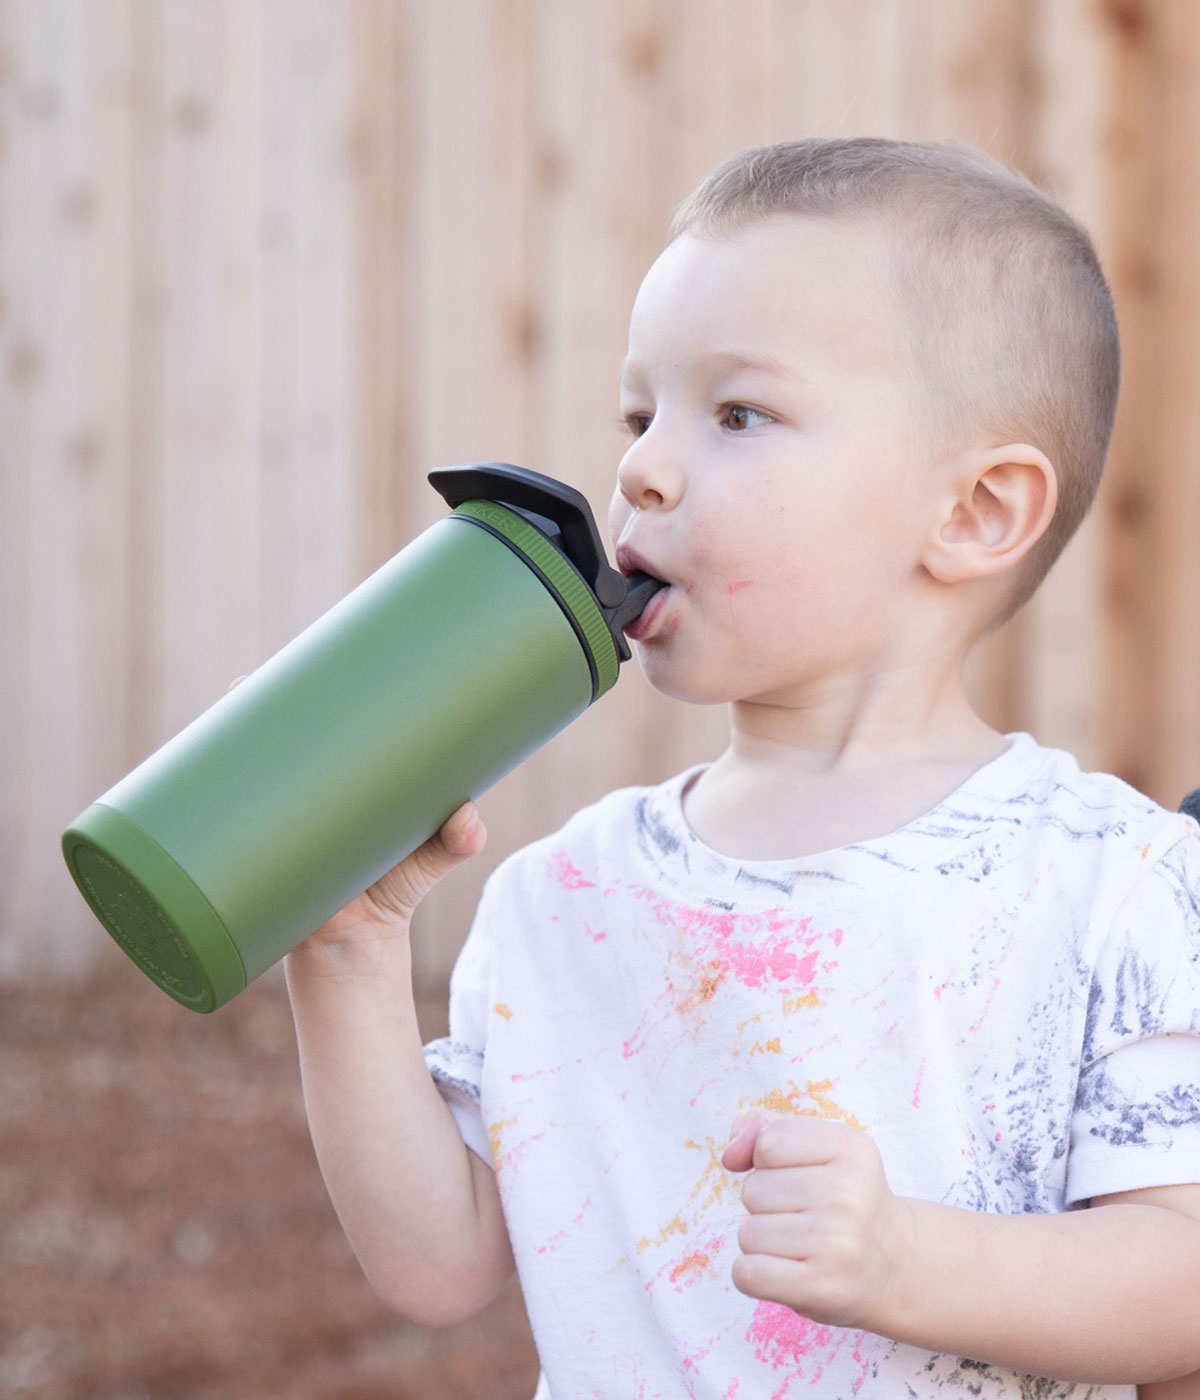 The image shows a little, toddler-aged boy taking a drink from a 14oz Sport Bottle.